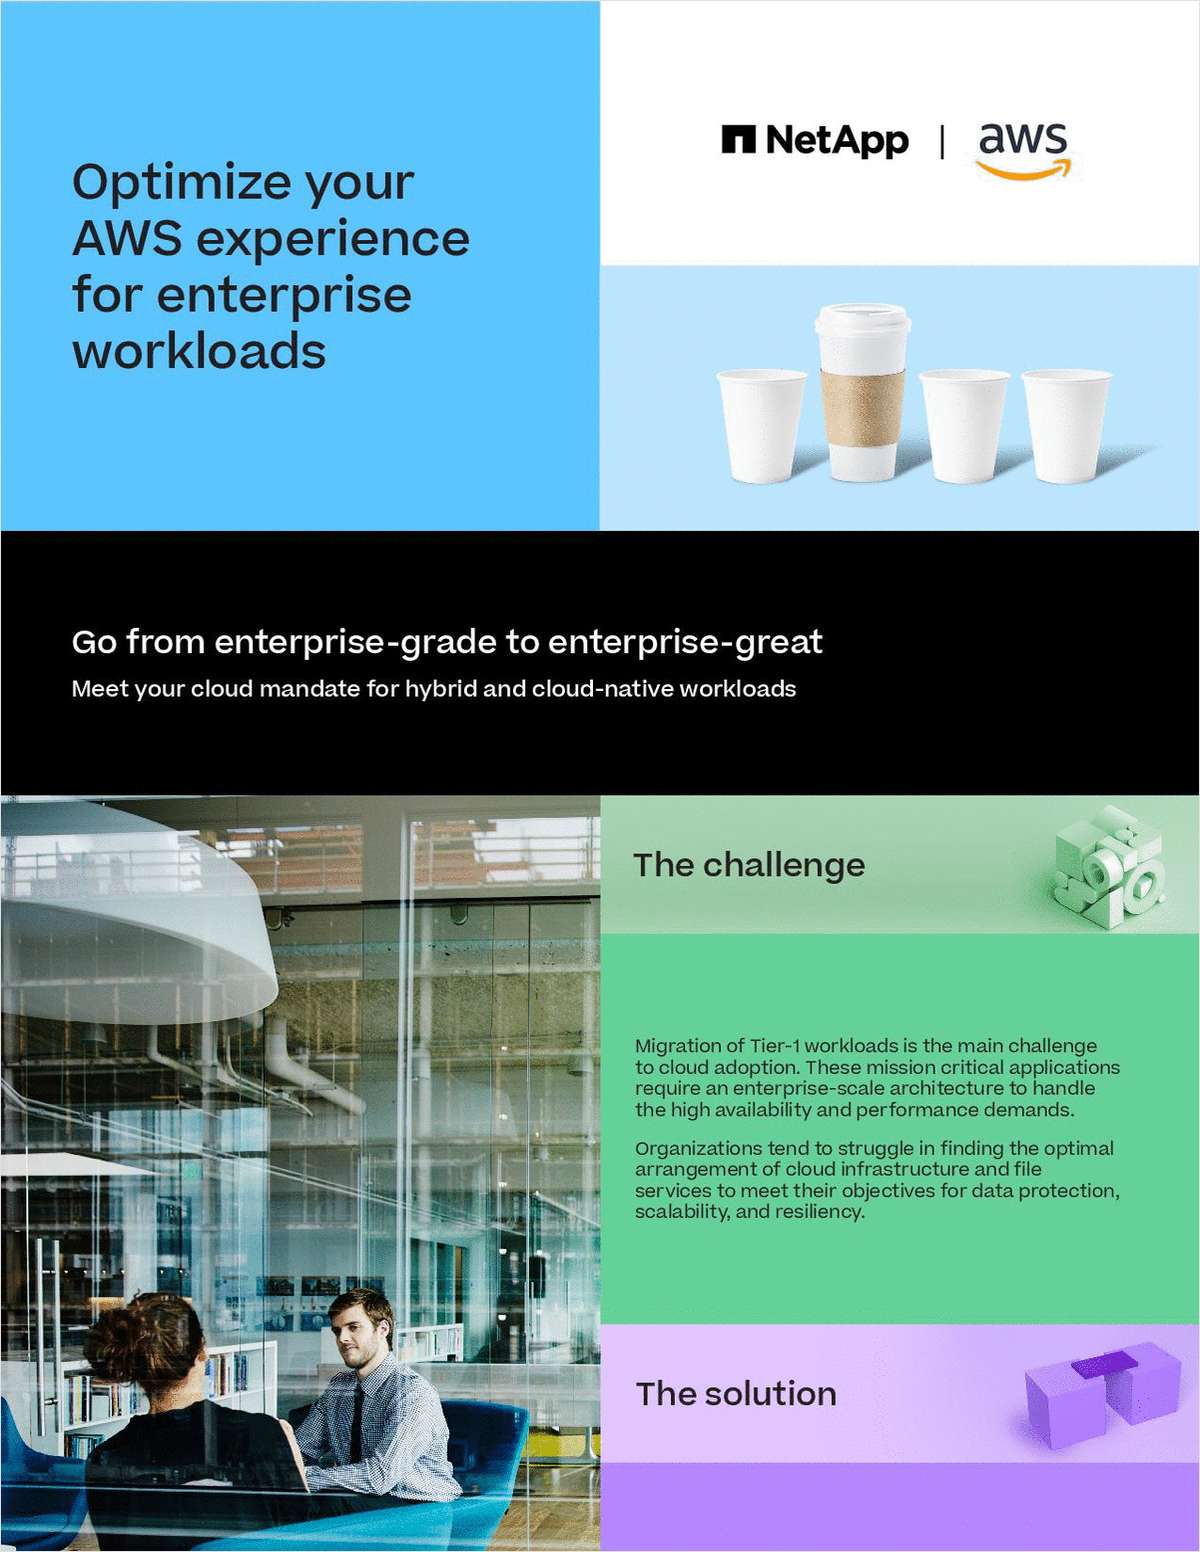 Optimize your AWS experience for enterprise workloads